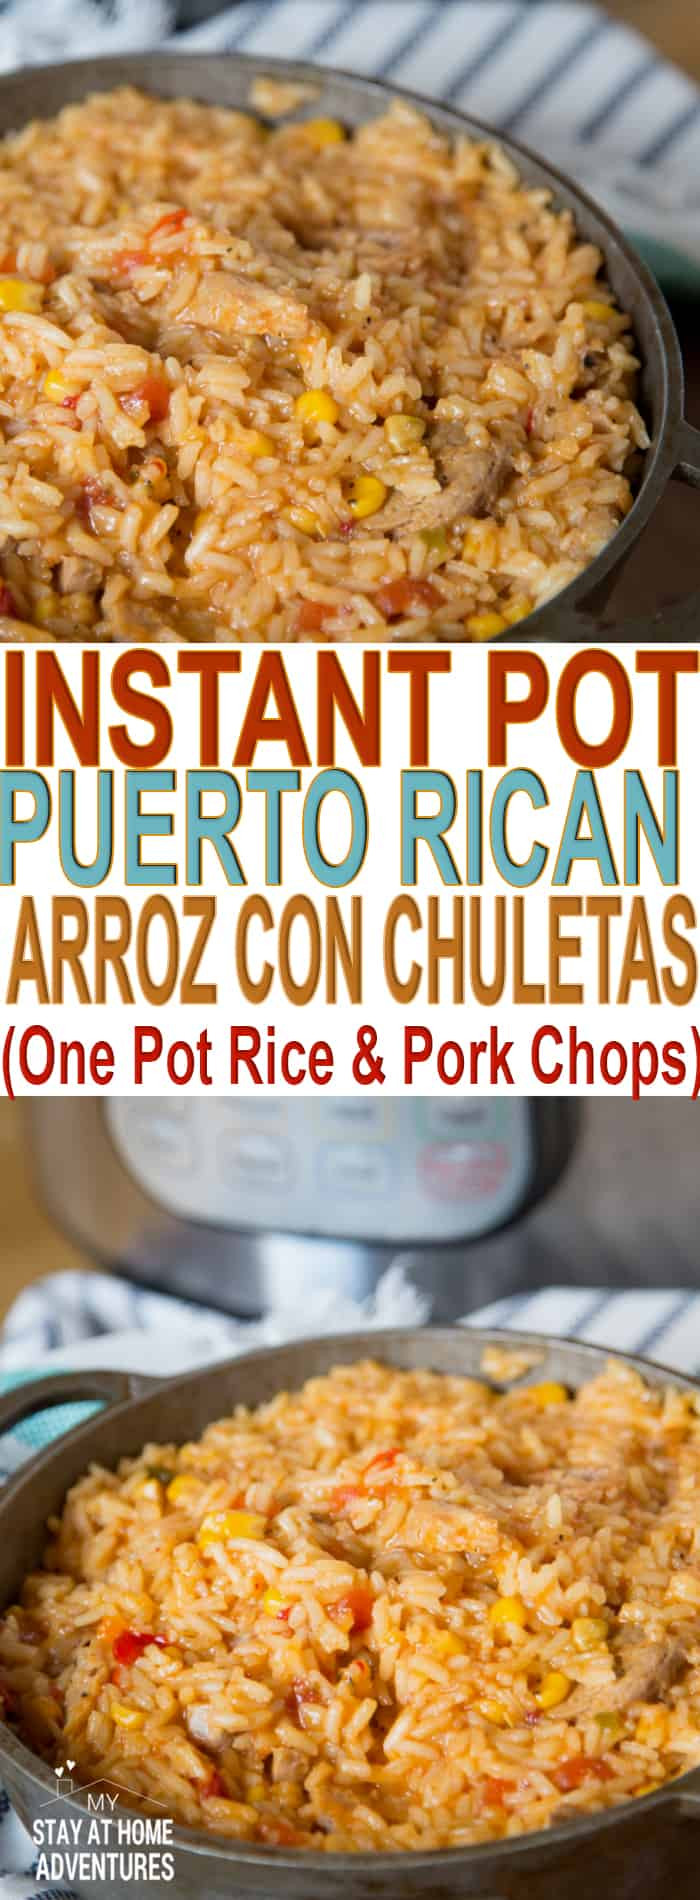 Instant Pot Pork Chops And Rice
 Instant Pot Rice with Pork Chops or Arroz con Chuletas Recipe